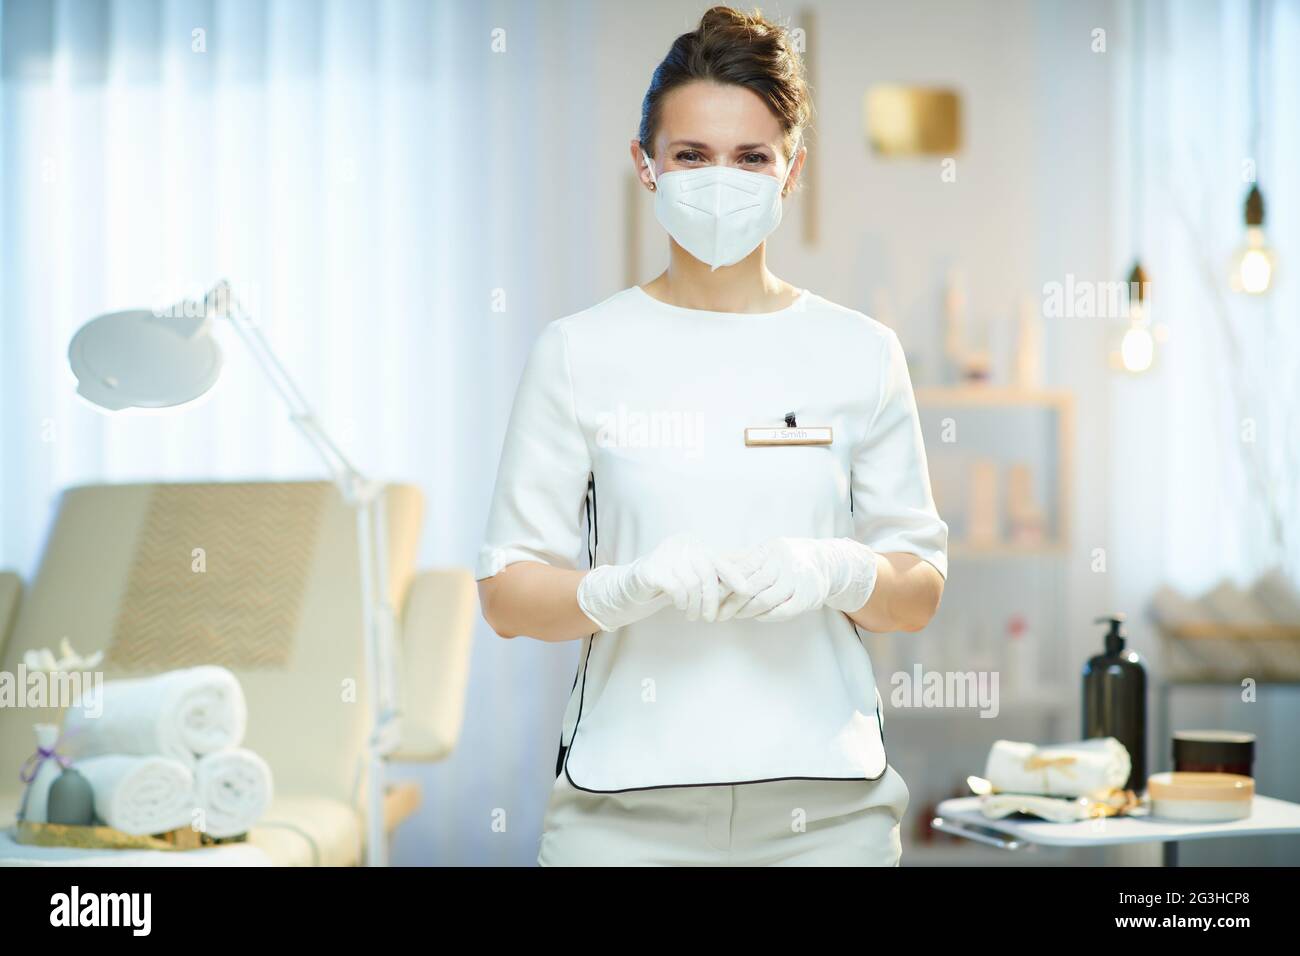 Business during coronavirus pandemic. Portrait of middle aged woman worker with ffp2 mask in modern beauty salon. Stock Photo